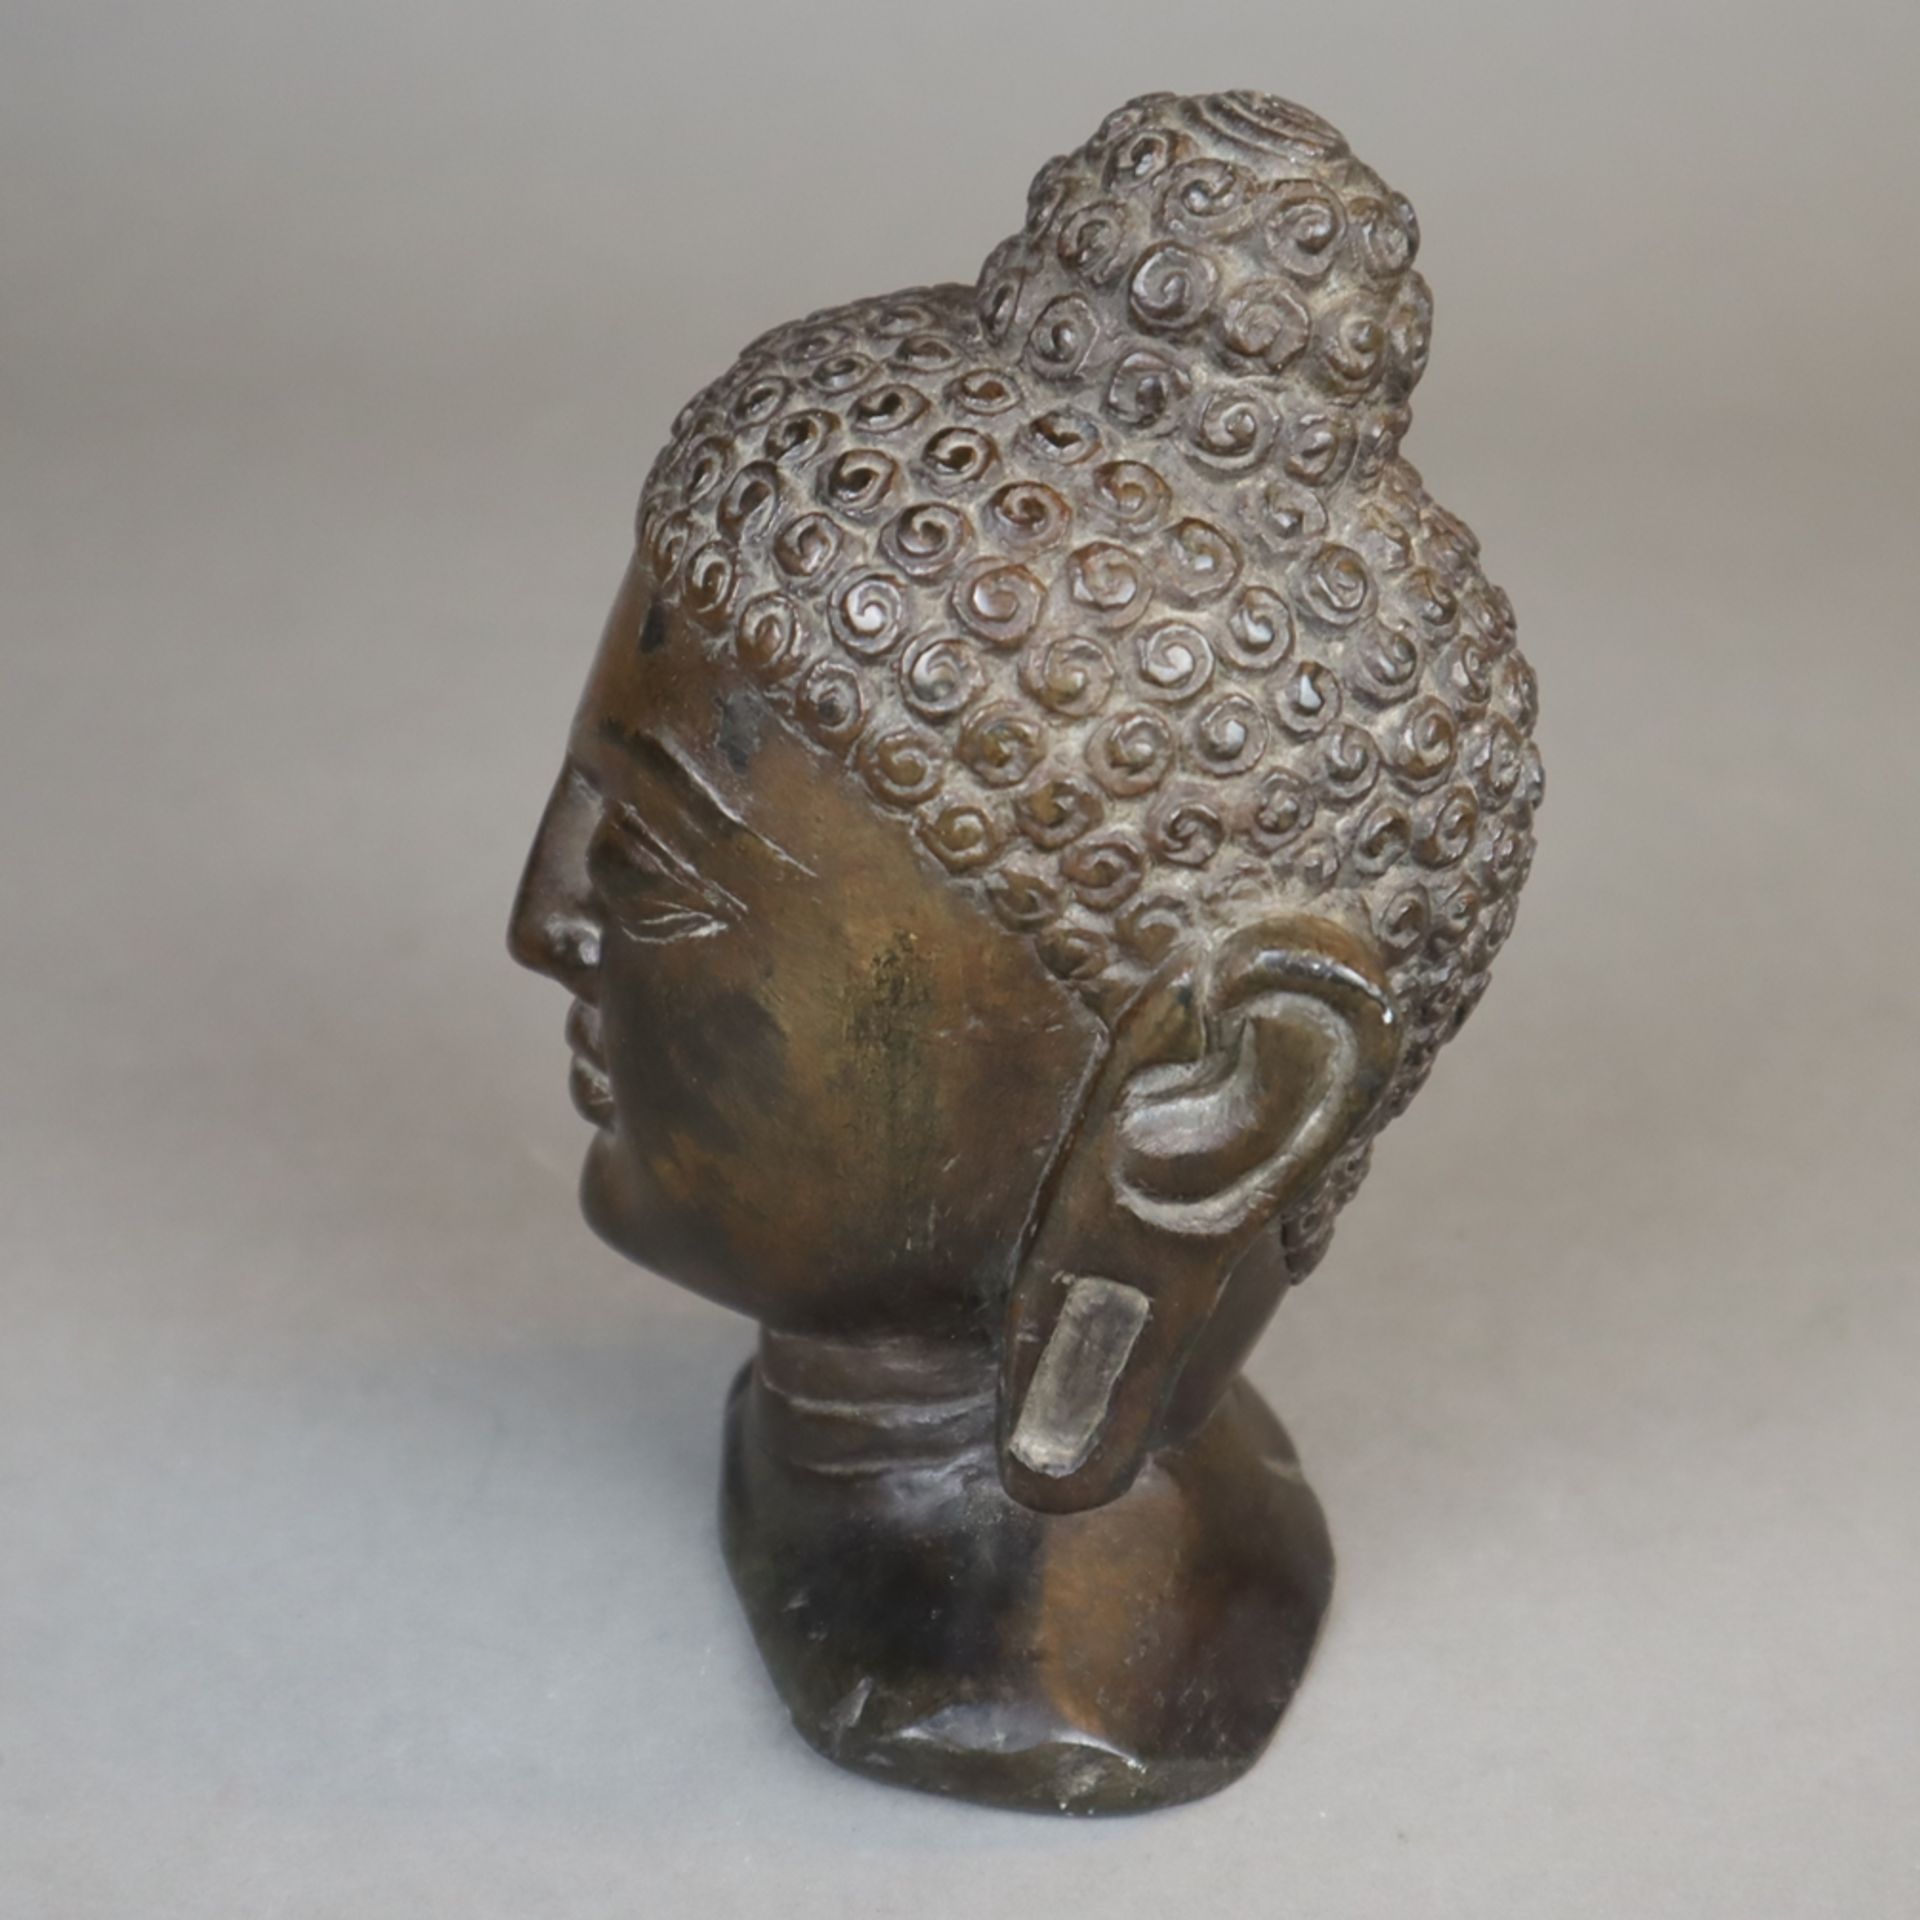 Small Buddha head - stone sculpture, India, fine facial features with meditatively half-closed eyes - Image 3 of 5